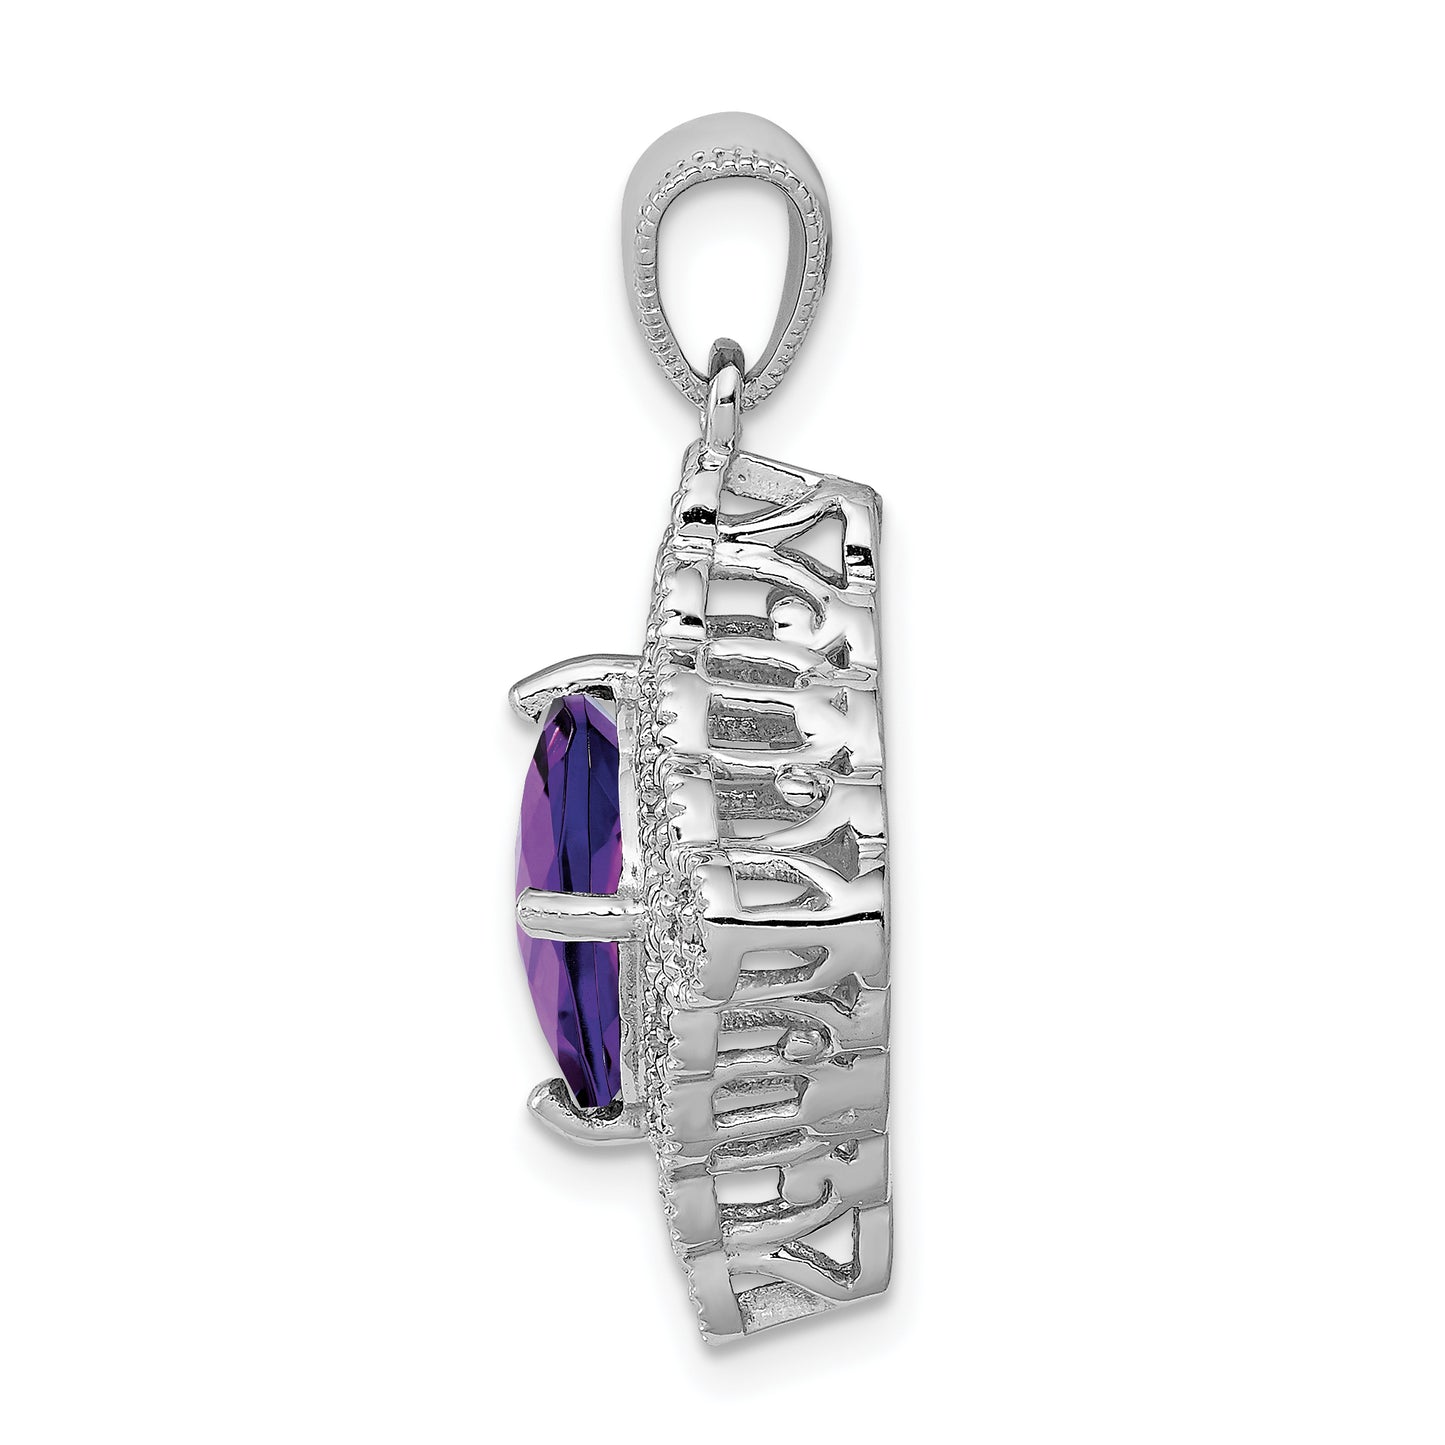 Sterling Silver Rhodium-plated Amethyst and Diamond Pendant